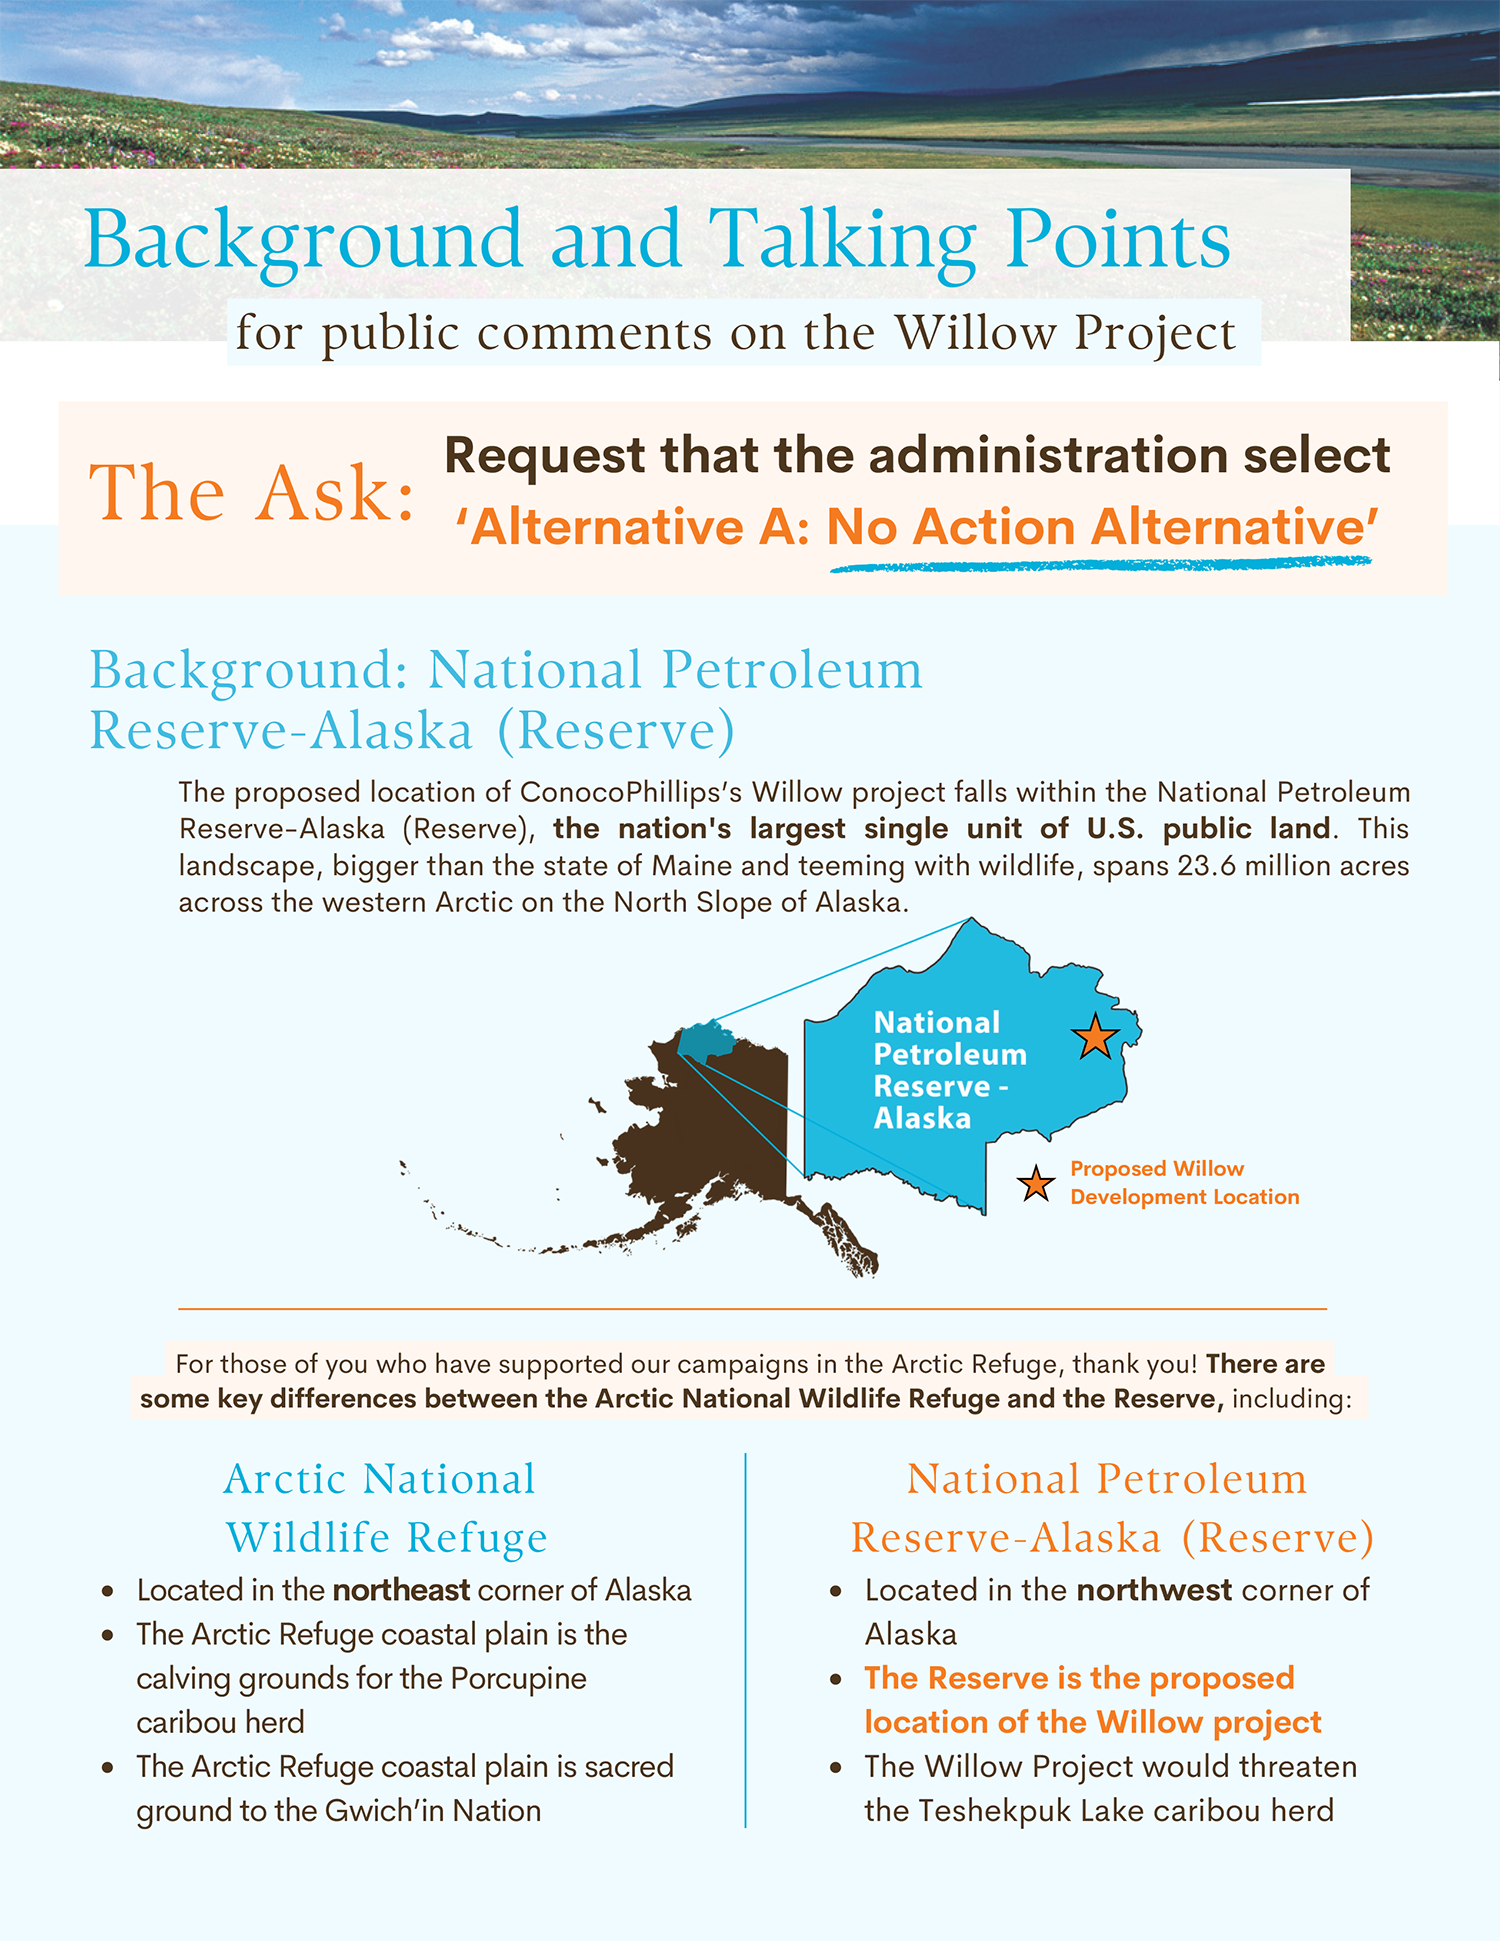 The National Petroleum Reserve-Alaska (Reserve) is an ecologically rich landscape that presents a one-of-a-kind climate opportunity for the nation. The Reserve is essential to President Biden’s climate and conservation goals of reducing U.S. emissions, increasing land protections to reverse biodiversity loss, and growing natural carbon sinks by 2030. ConocoPhillips’ Willow Project is by far the largest oil extraction project proposed on federal lands today. Plans call for up to 250 wells, estimated to produce up to 629 million barrels of oil, locking in oil infrastructure in the rural Arctic for 30+ years The Willow project is estimated to add up to 287 million metric tons of CO2 to the atmosphere over the next 30 years — equivalent to the annual emissions from 76 new coal-fired power plants. The Willow project would unleash nearly double the planet-warming pollution that President Biden’s entire clean energy plan on public lands and waters is meant to prevent in the next decade. Willow is a climate disaster in-waiting. Allowing this project to go forward as planned will lock in at least three decades of Arctic fossil fuel pollution at a time when scientists say the world must be rapidly transitioning away from fossil fuels. Climate change is warming temperatures in Arctic Alaska at 4x the rate of the rest of the planet. With each passing year, the Arctic is especially hard hit by destabilizing on-the-ground effects including sea ice melt, permafrost thaw and coastal erosion. This project would do irreversible damage to a remote, ecologically rich landscape. The plan authorizes construction within and adjacent to both the Reserve’s Teshekpuk Lake and Colville River Special Areas. These special areas, created for their ecological importance, include one of the most productive wetland complexes in the Arctic and important calving and foraging ground for the Teshekpuk Lake Caribou Herd. The western Arctic is filled with robust wild ecosystems that support caribou, geese, loons, salmon, polar bears, and bowhead whales, along with 13 communities within and adjacent to the Reserve. Any disruption that jeopardizes the ecosystem’s health puts all its inhabitants at risk. ConocoPhillips executives have told investors that the company had already identified 3 billion barrels of oil in nearby prospects and that Willow’s design was intended for expansion. The current analysis does not consider the impacts from these plans for further expansion.